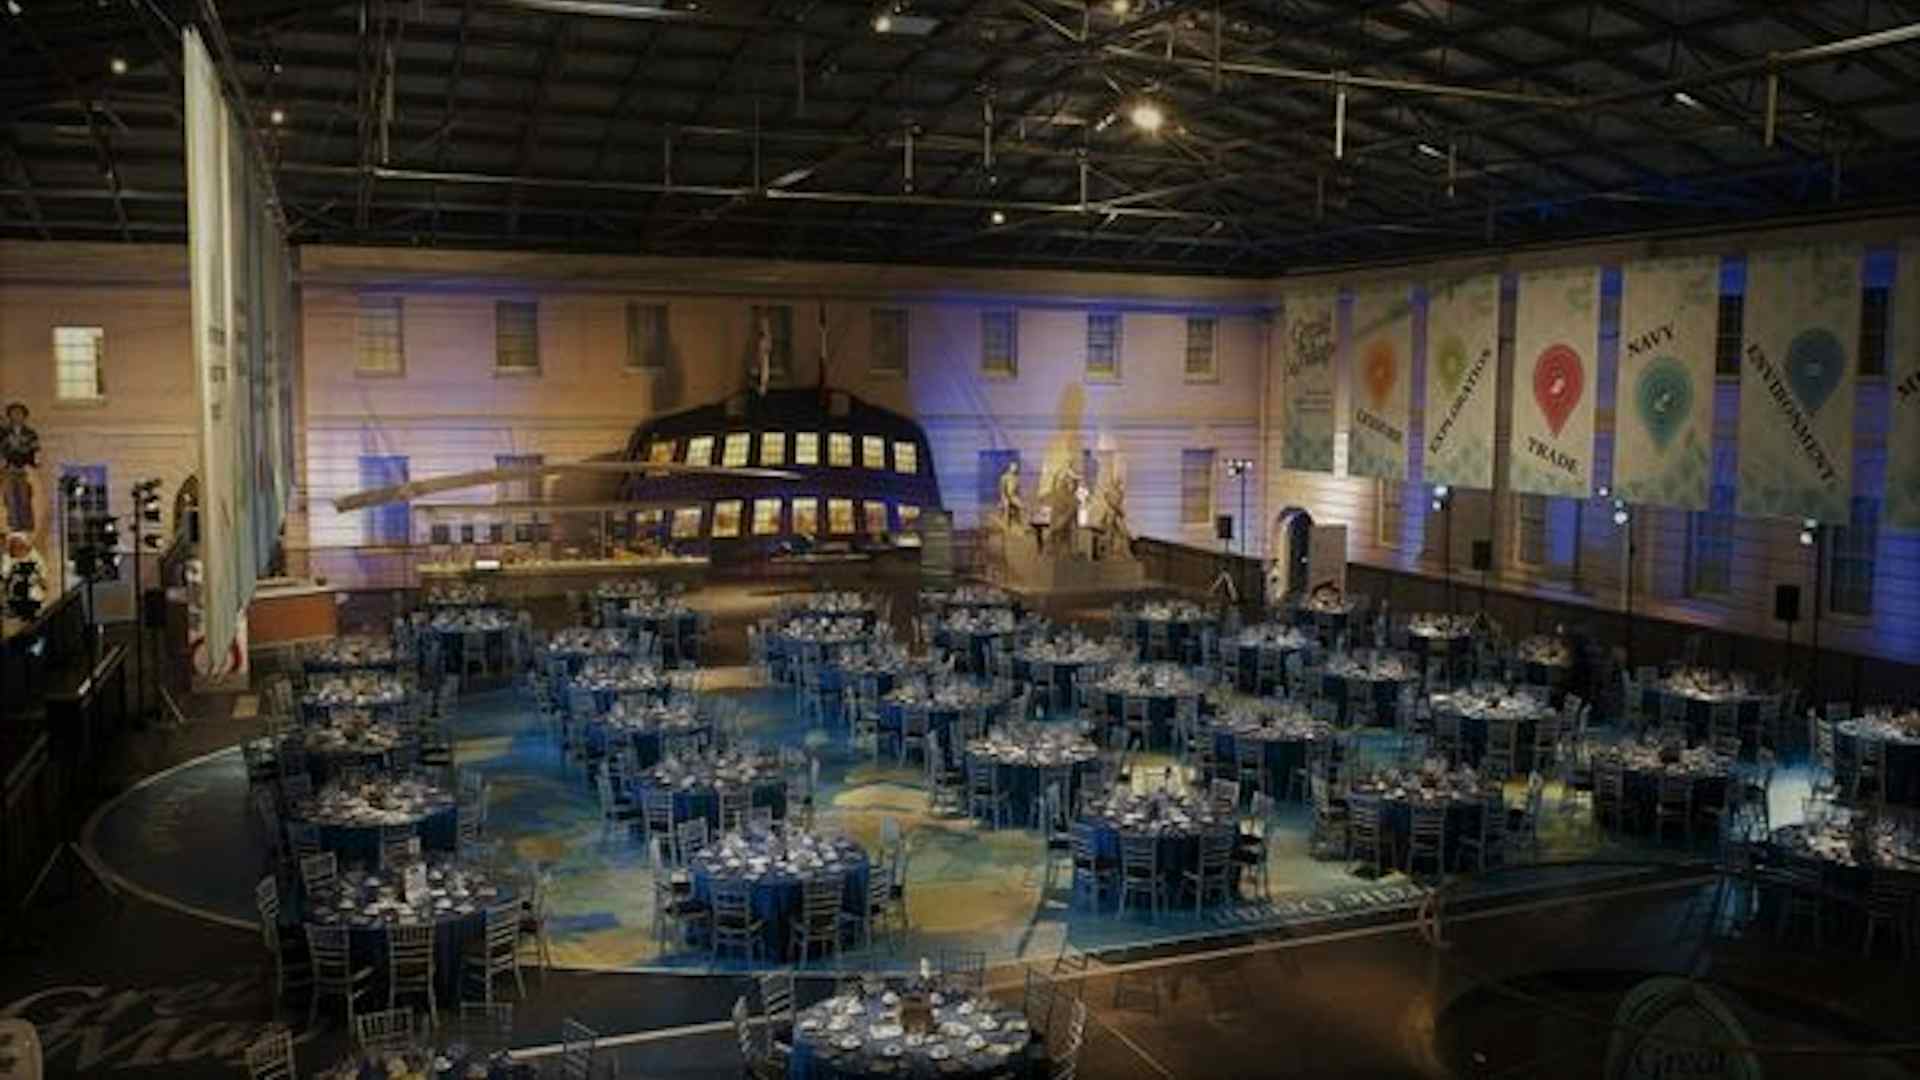 Make Waves with an Awards Ceremony at the National Maritime Museum